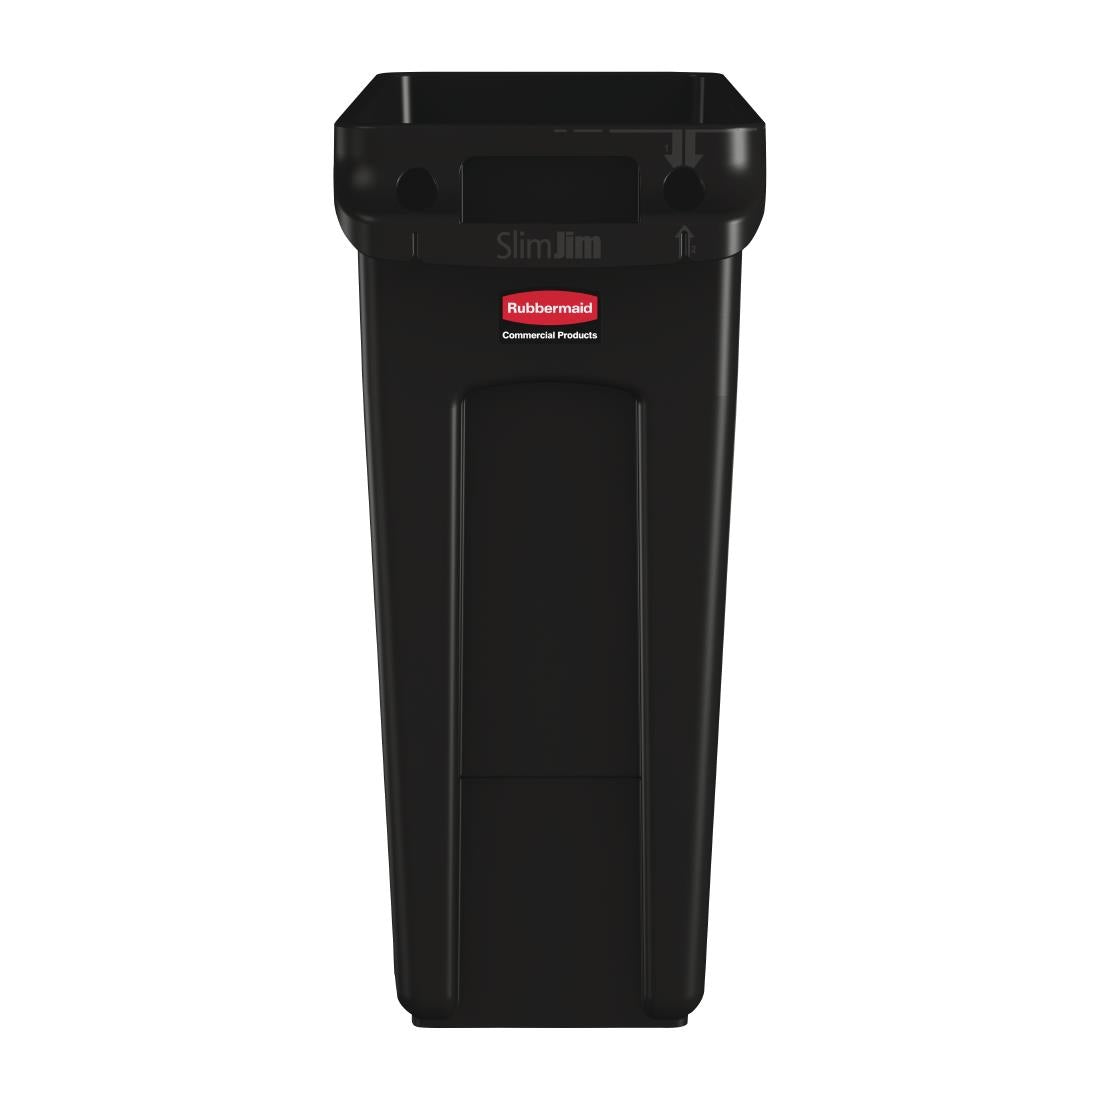 CP652 Rubbermaid Slim Jim Container With Venting Channels Black 60Ltr JD Catering Equipment Solutions Ltd